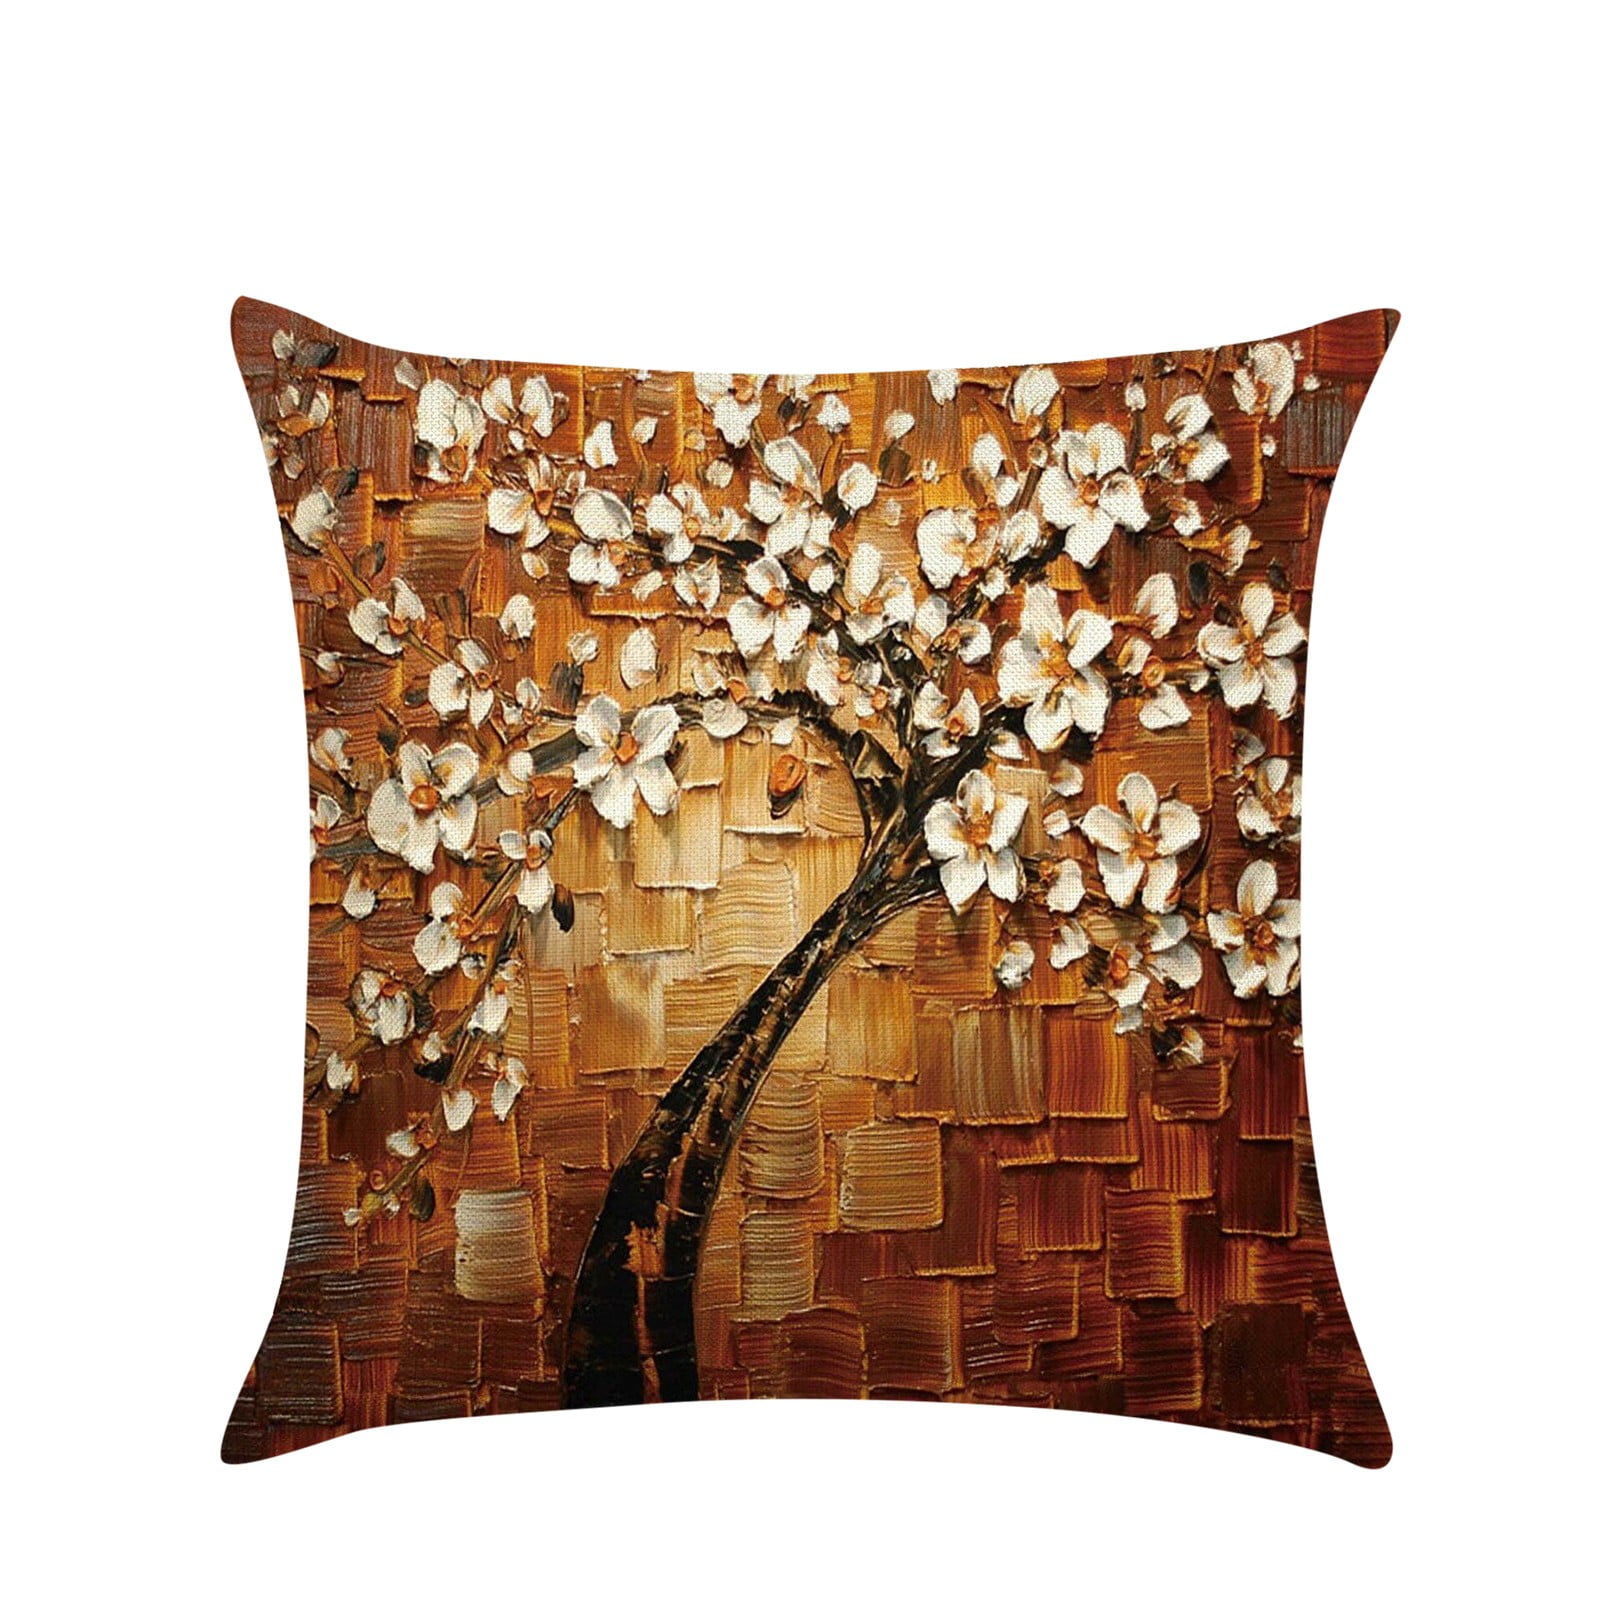 Colorful Flowers Deer Cotton Linen Cushion Cover Throw Pillow Home Decor B582 